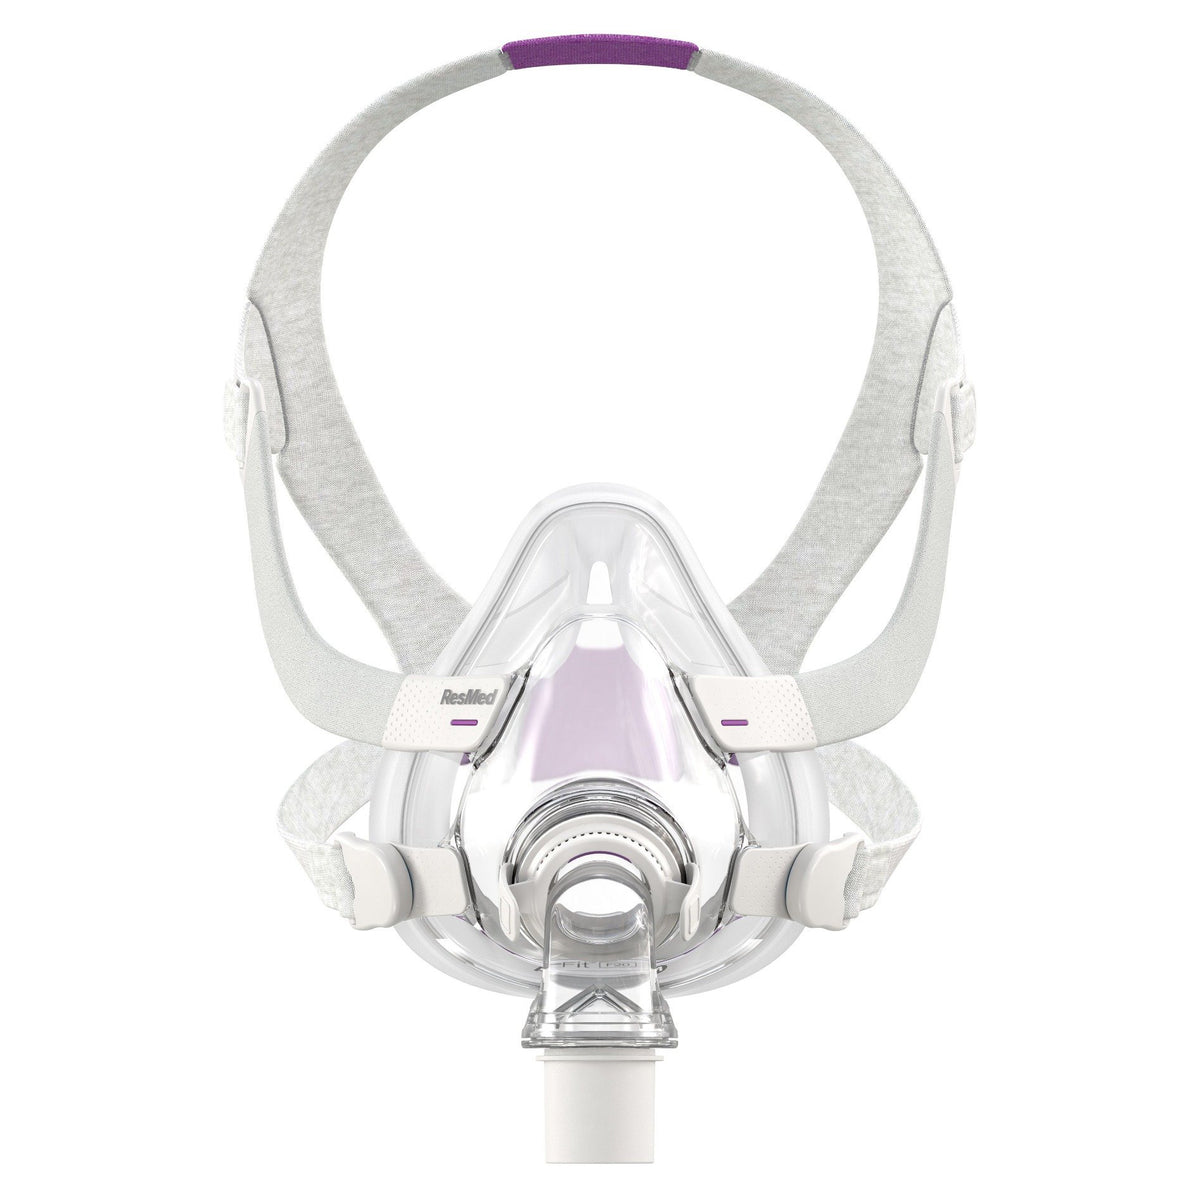 Resmed Airfit F20 for her CPAP mask